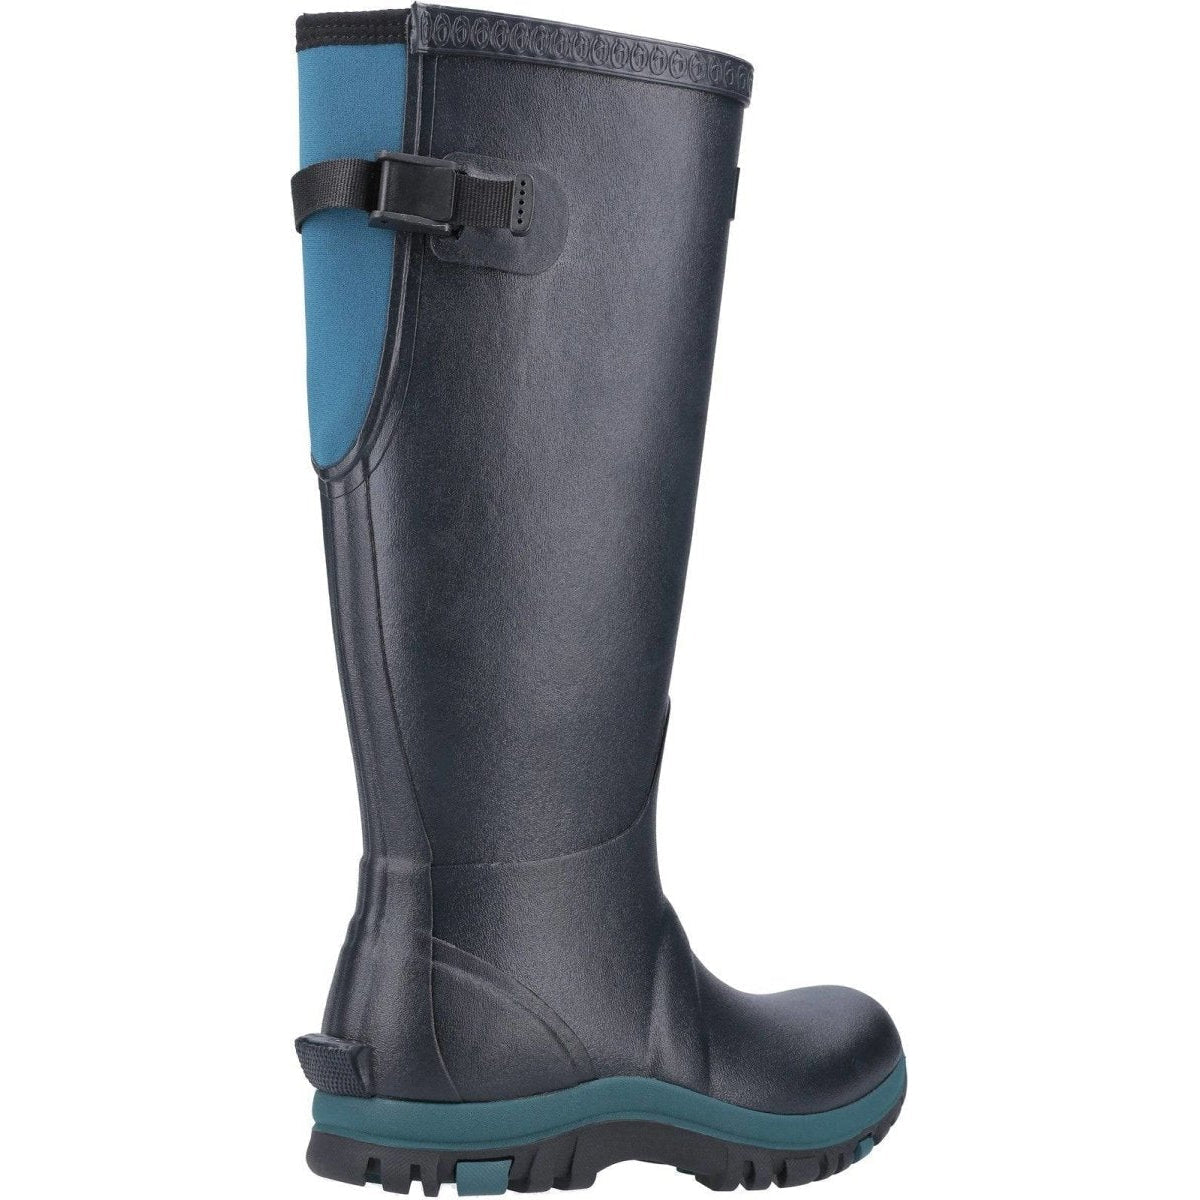 Cotswold Realm Womens Wellington Boots - Shoe Store Direct